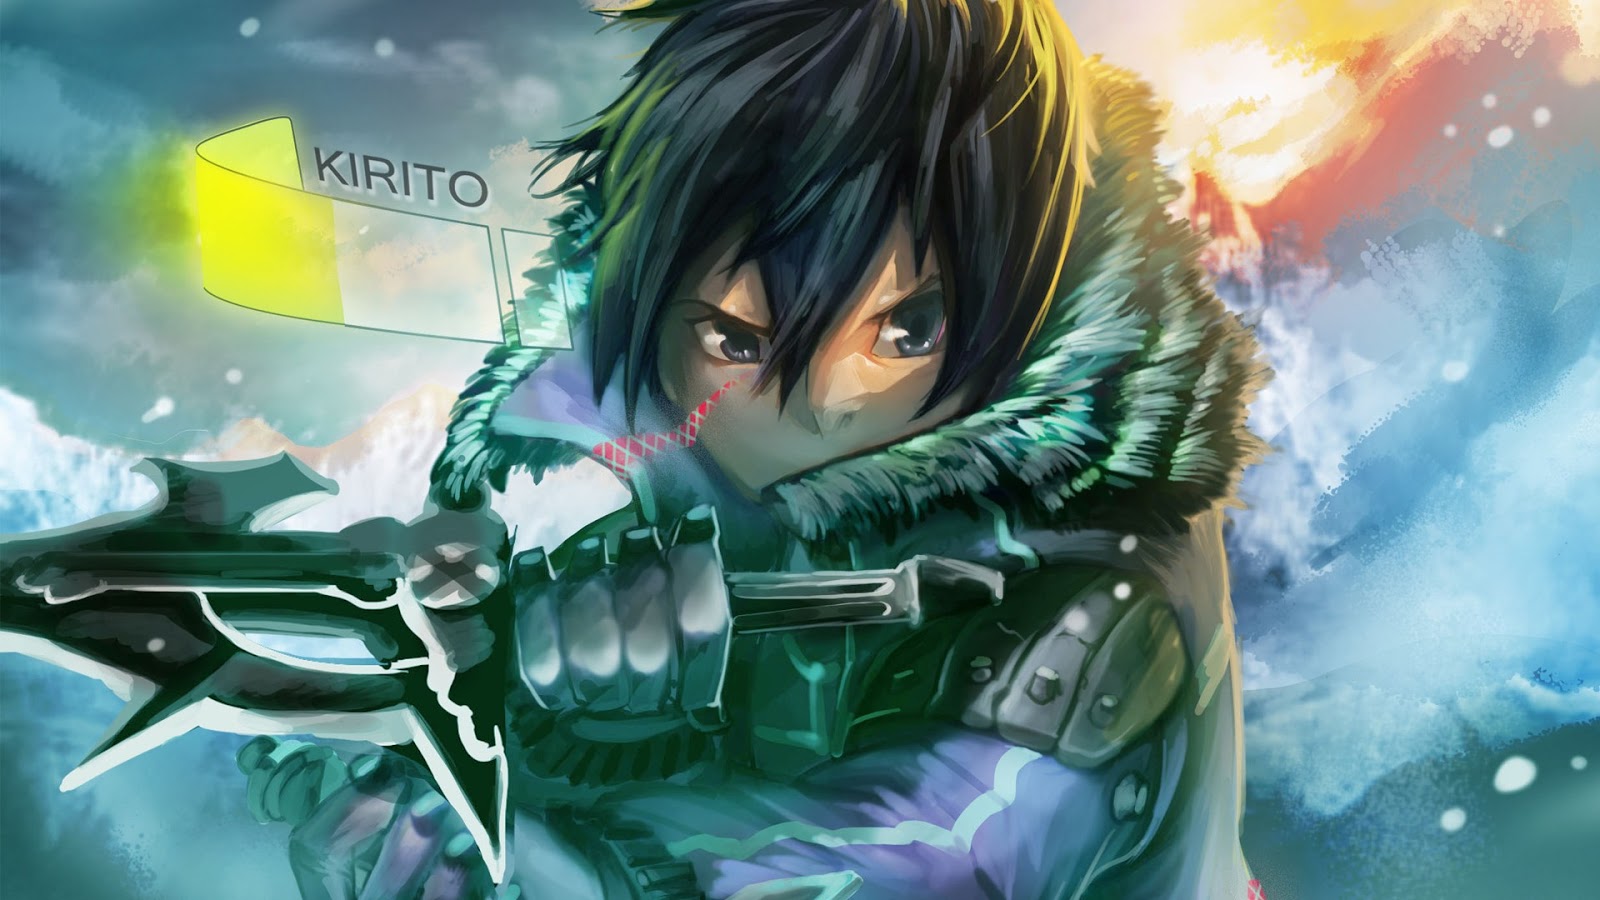 Kirito Fan Arts And Wallpaper Your Daily Anime